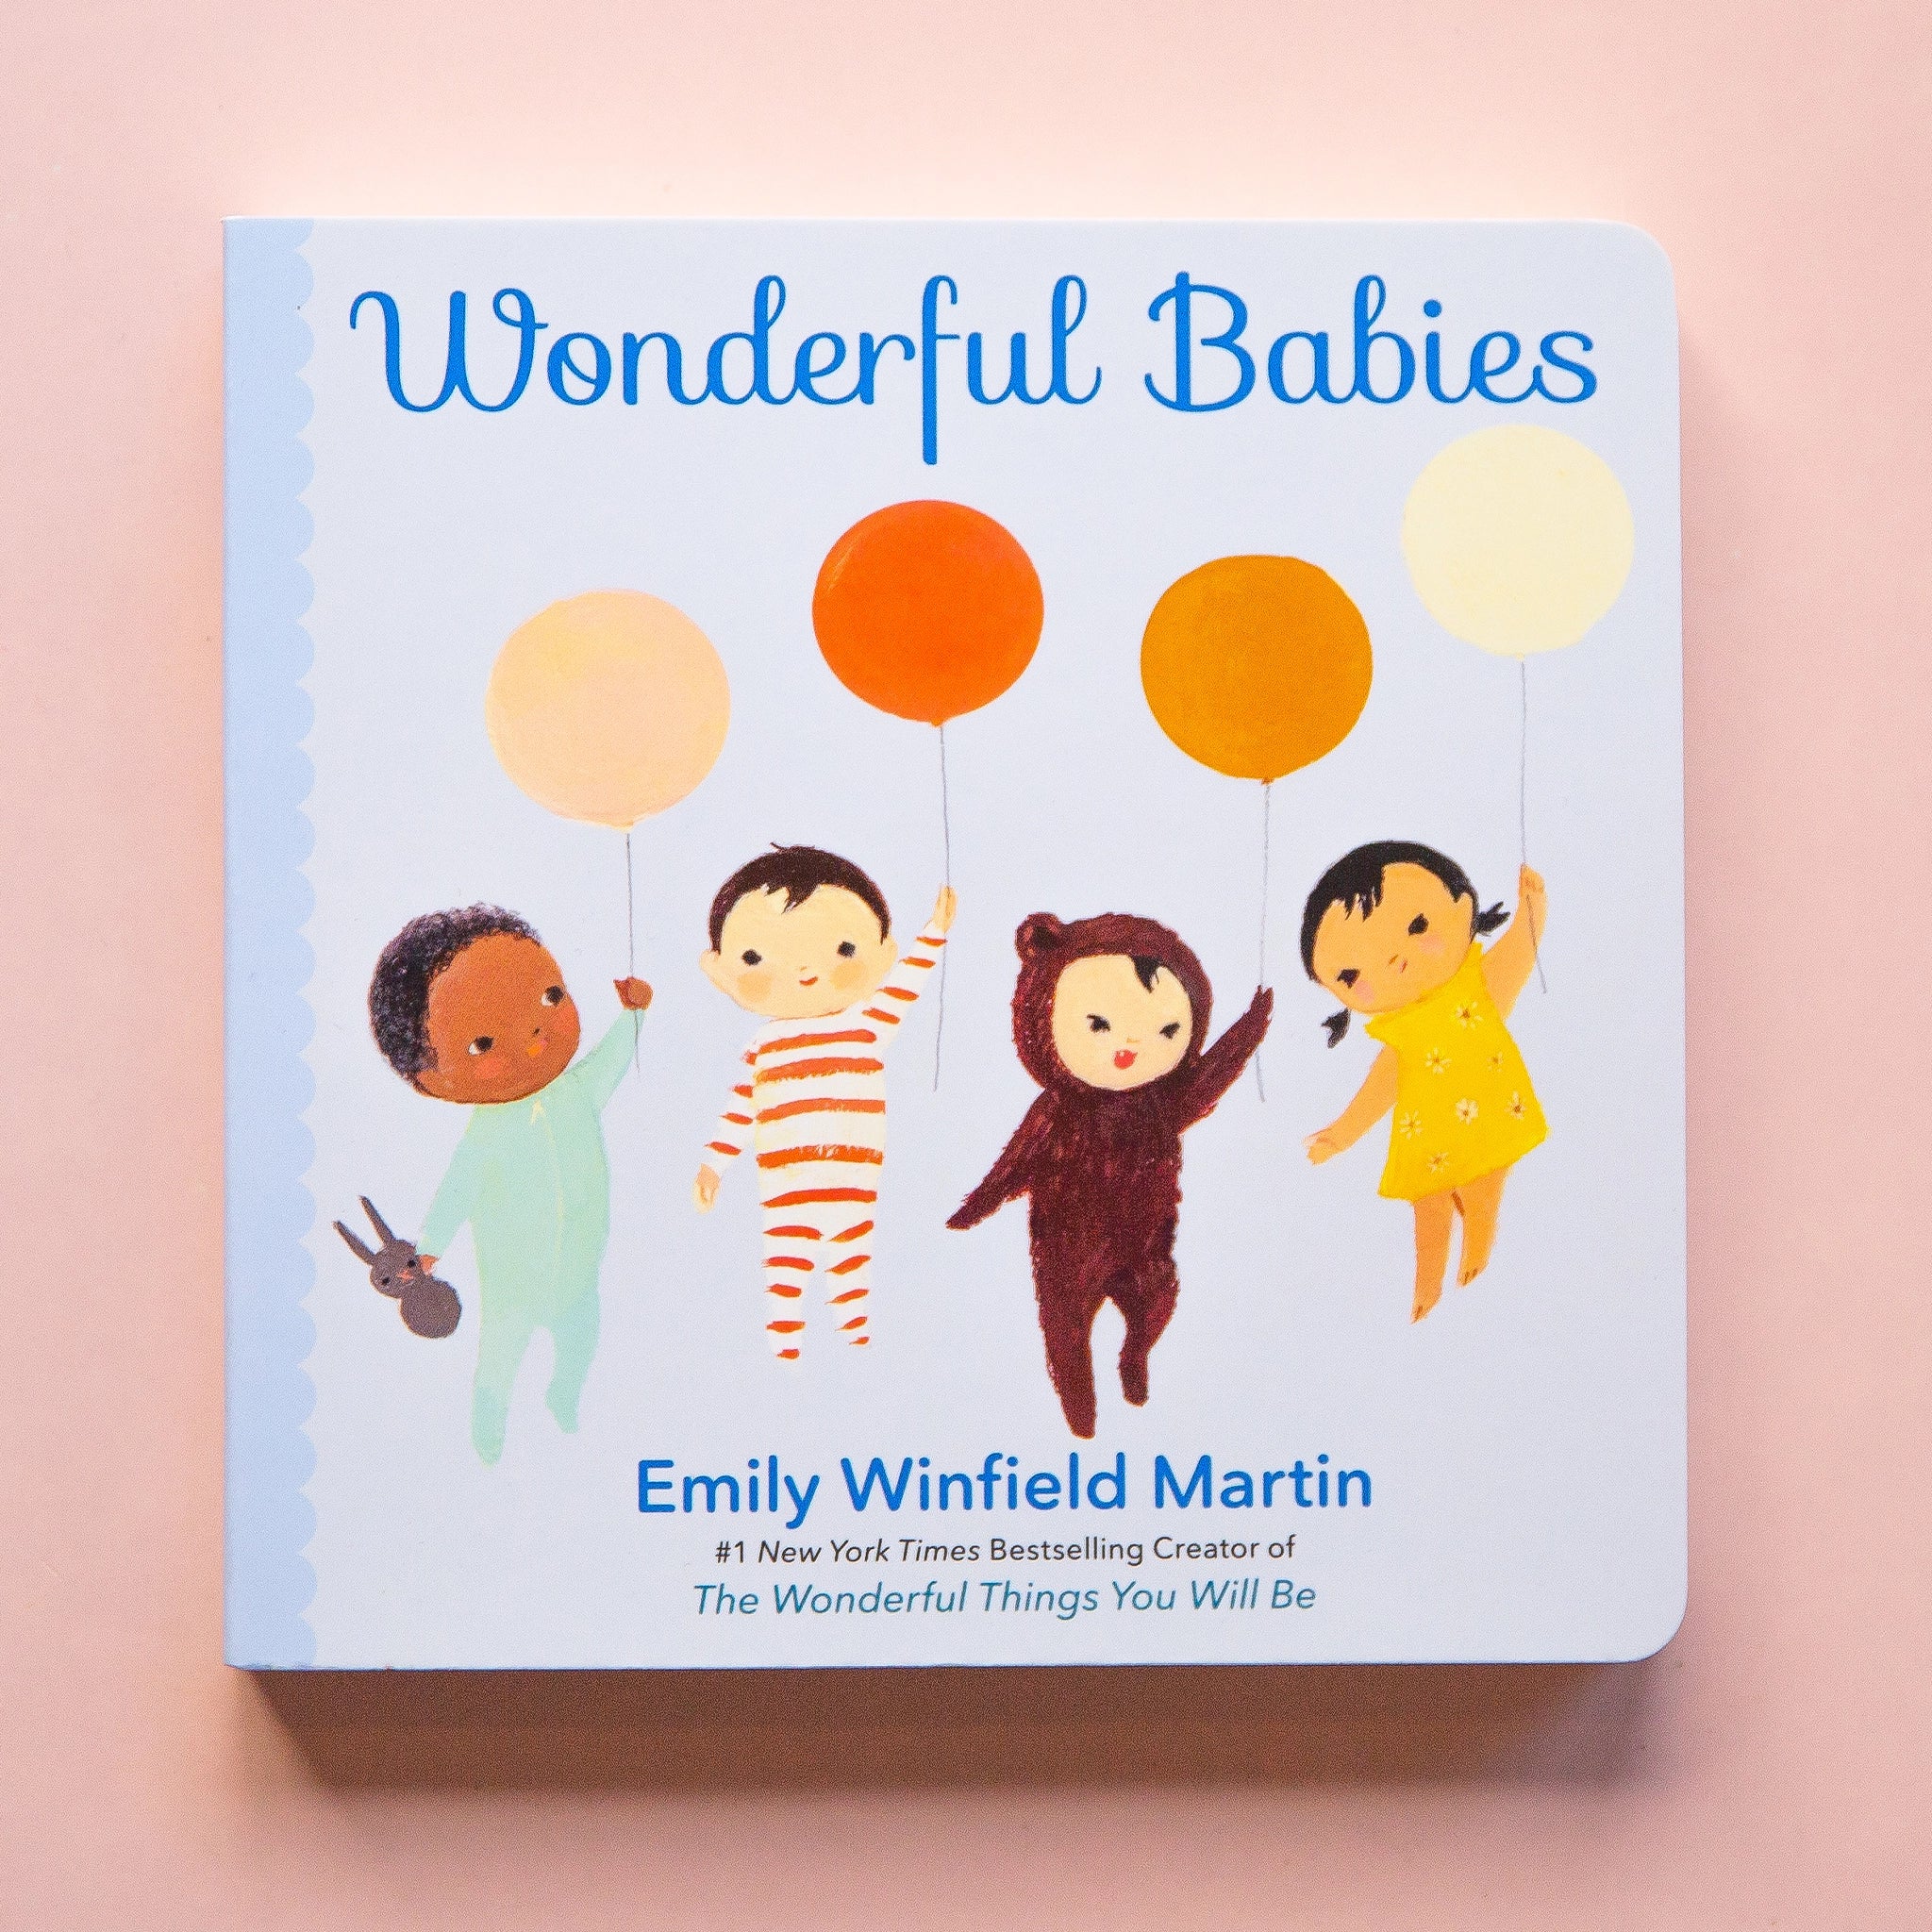 On a peachy background is a neutral book cover with four babies holding different colored balloons and the title across the top that reads, "Wonderful Babies".